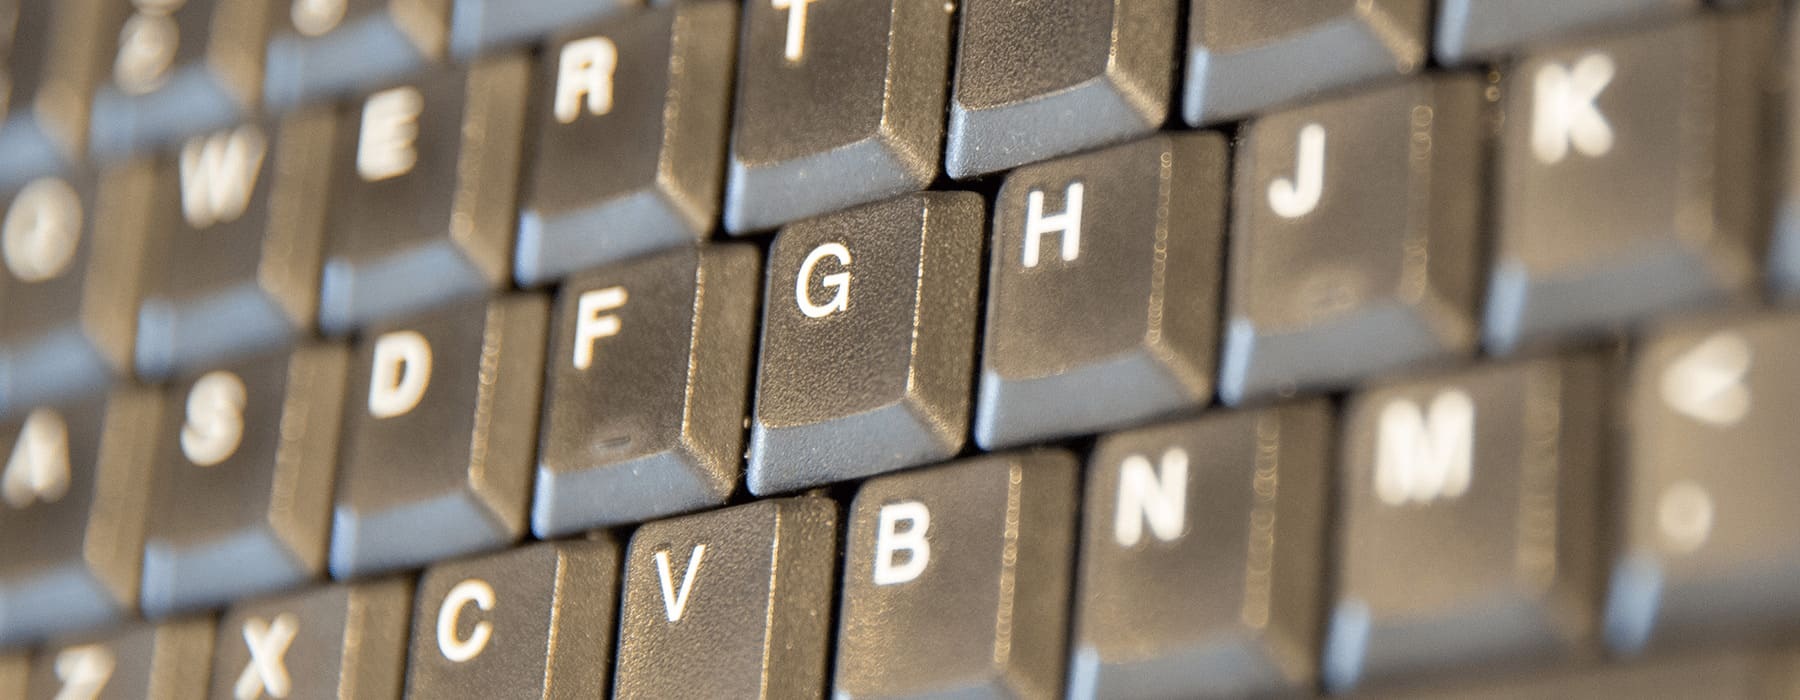 lifestyle image of a close-up of a keyboard